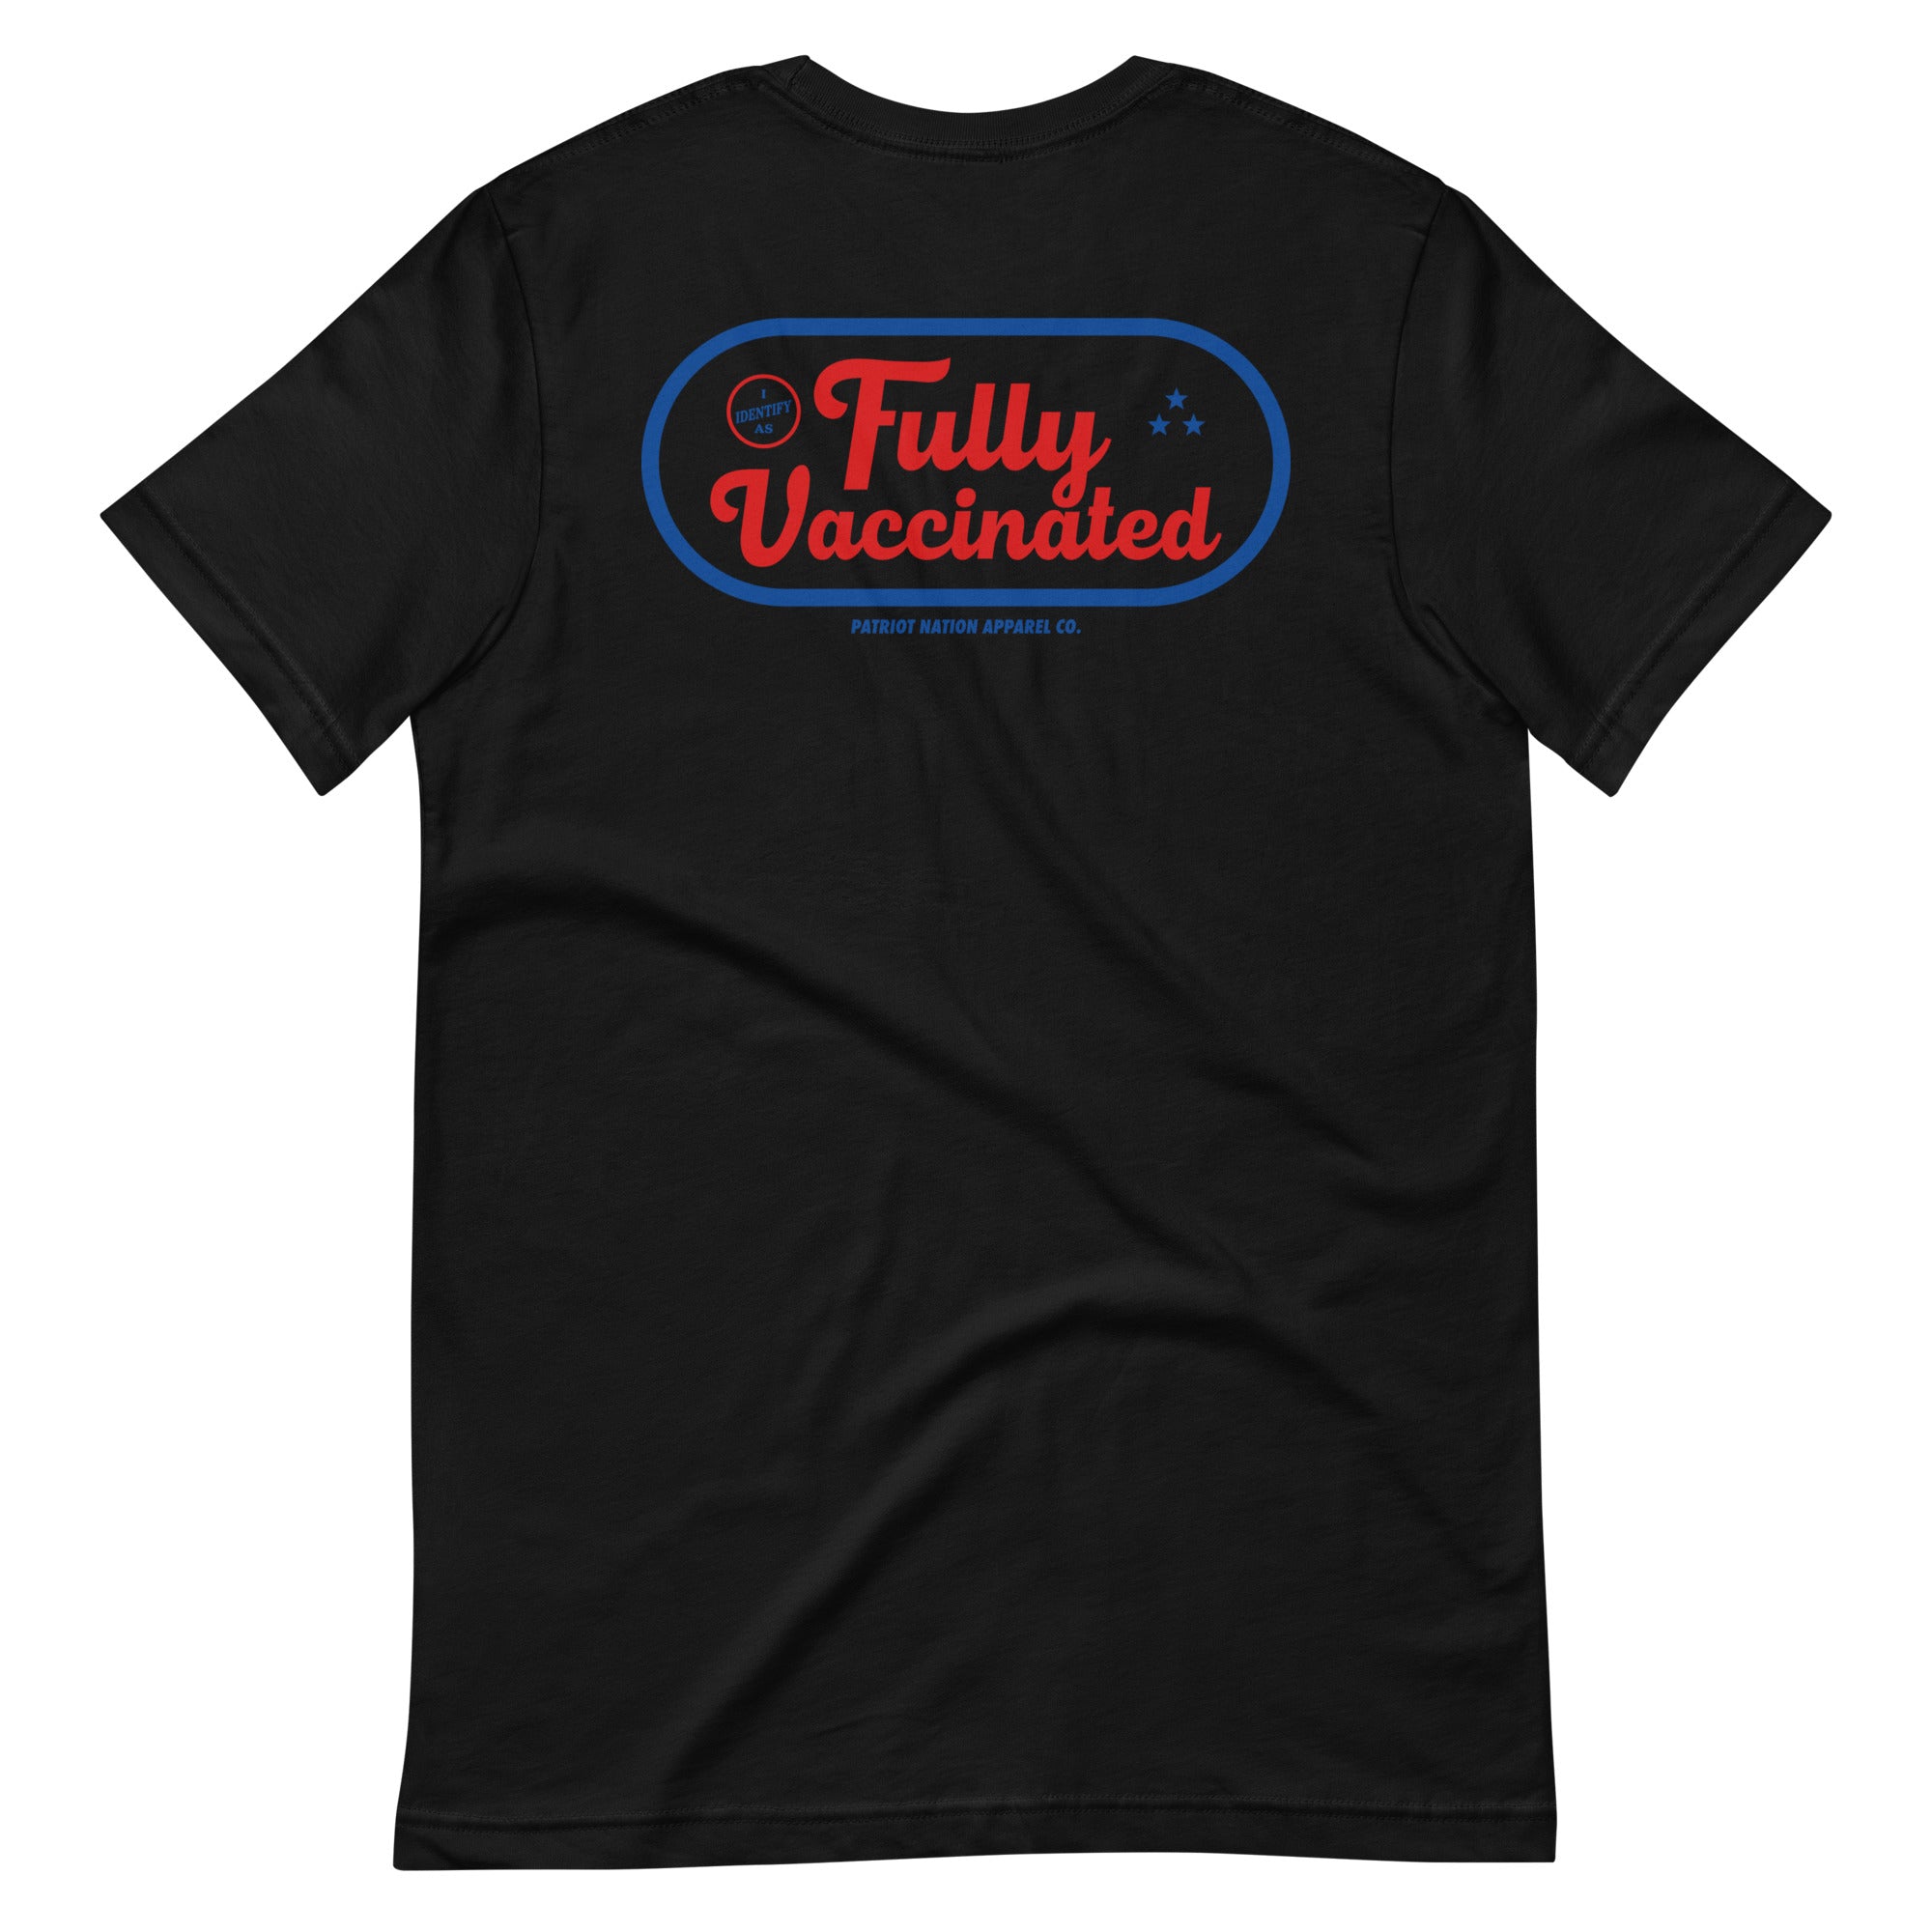 Fully Vaccinated T-shirt